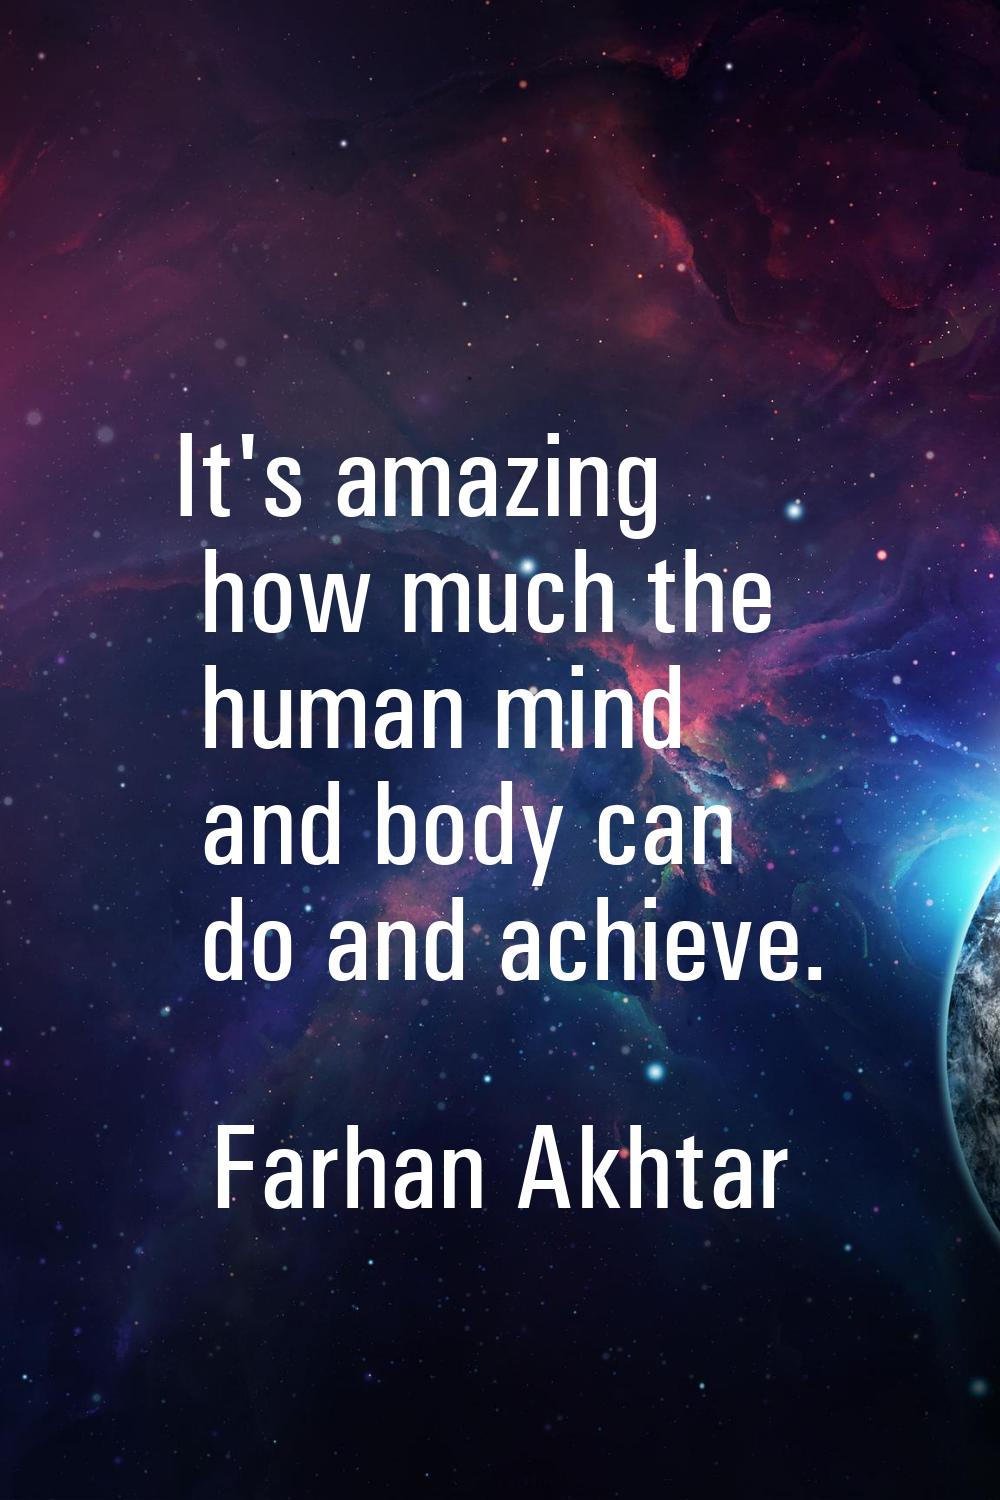 It's amazing how much the human mind and body can do and achieve.